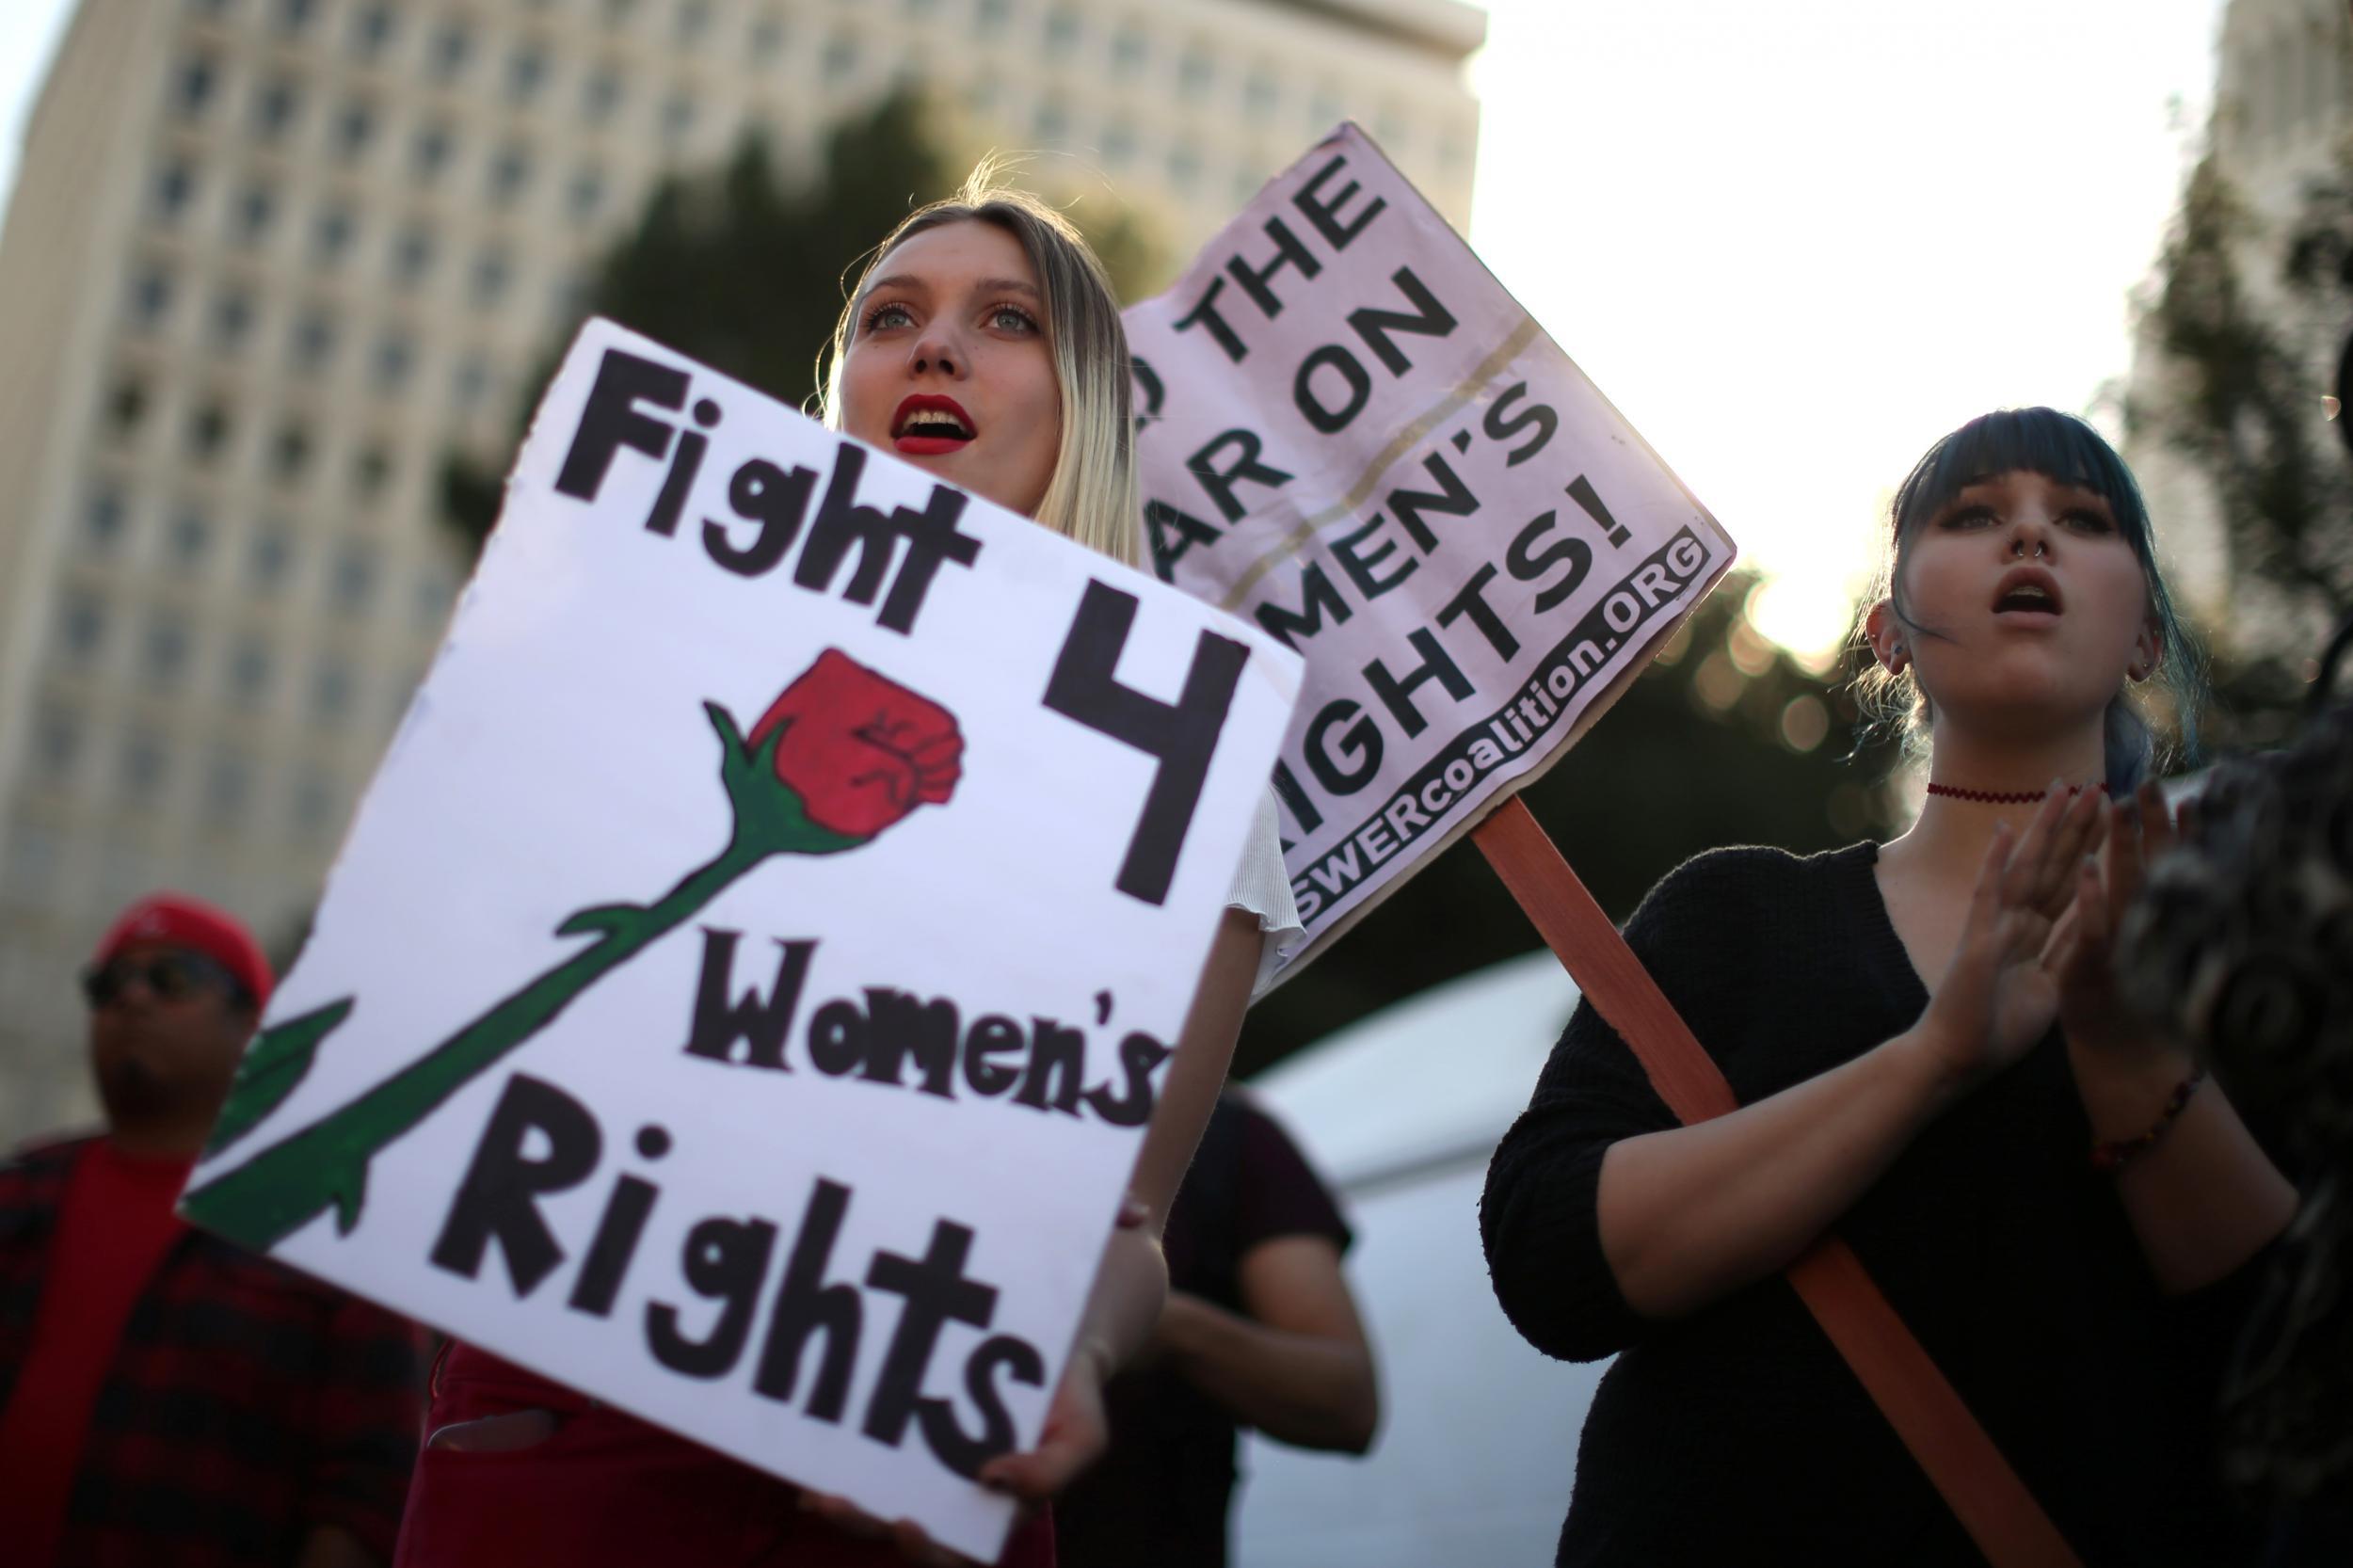 Protesters at an International Women's Day event in Los Angeles in March